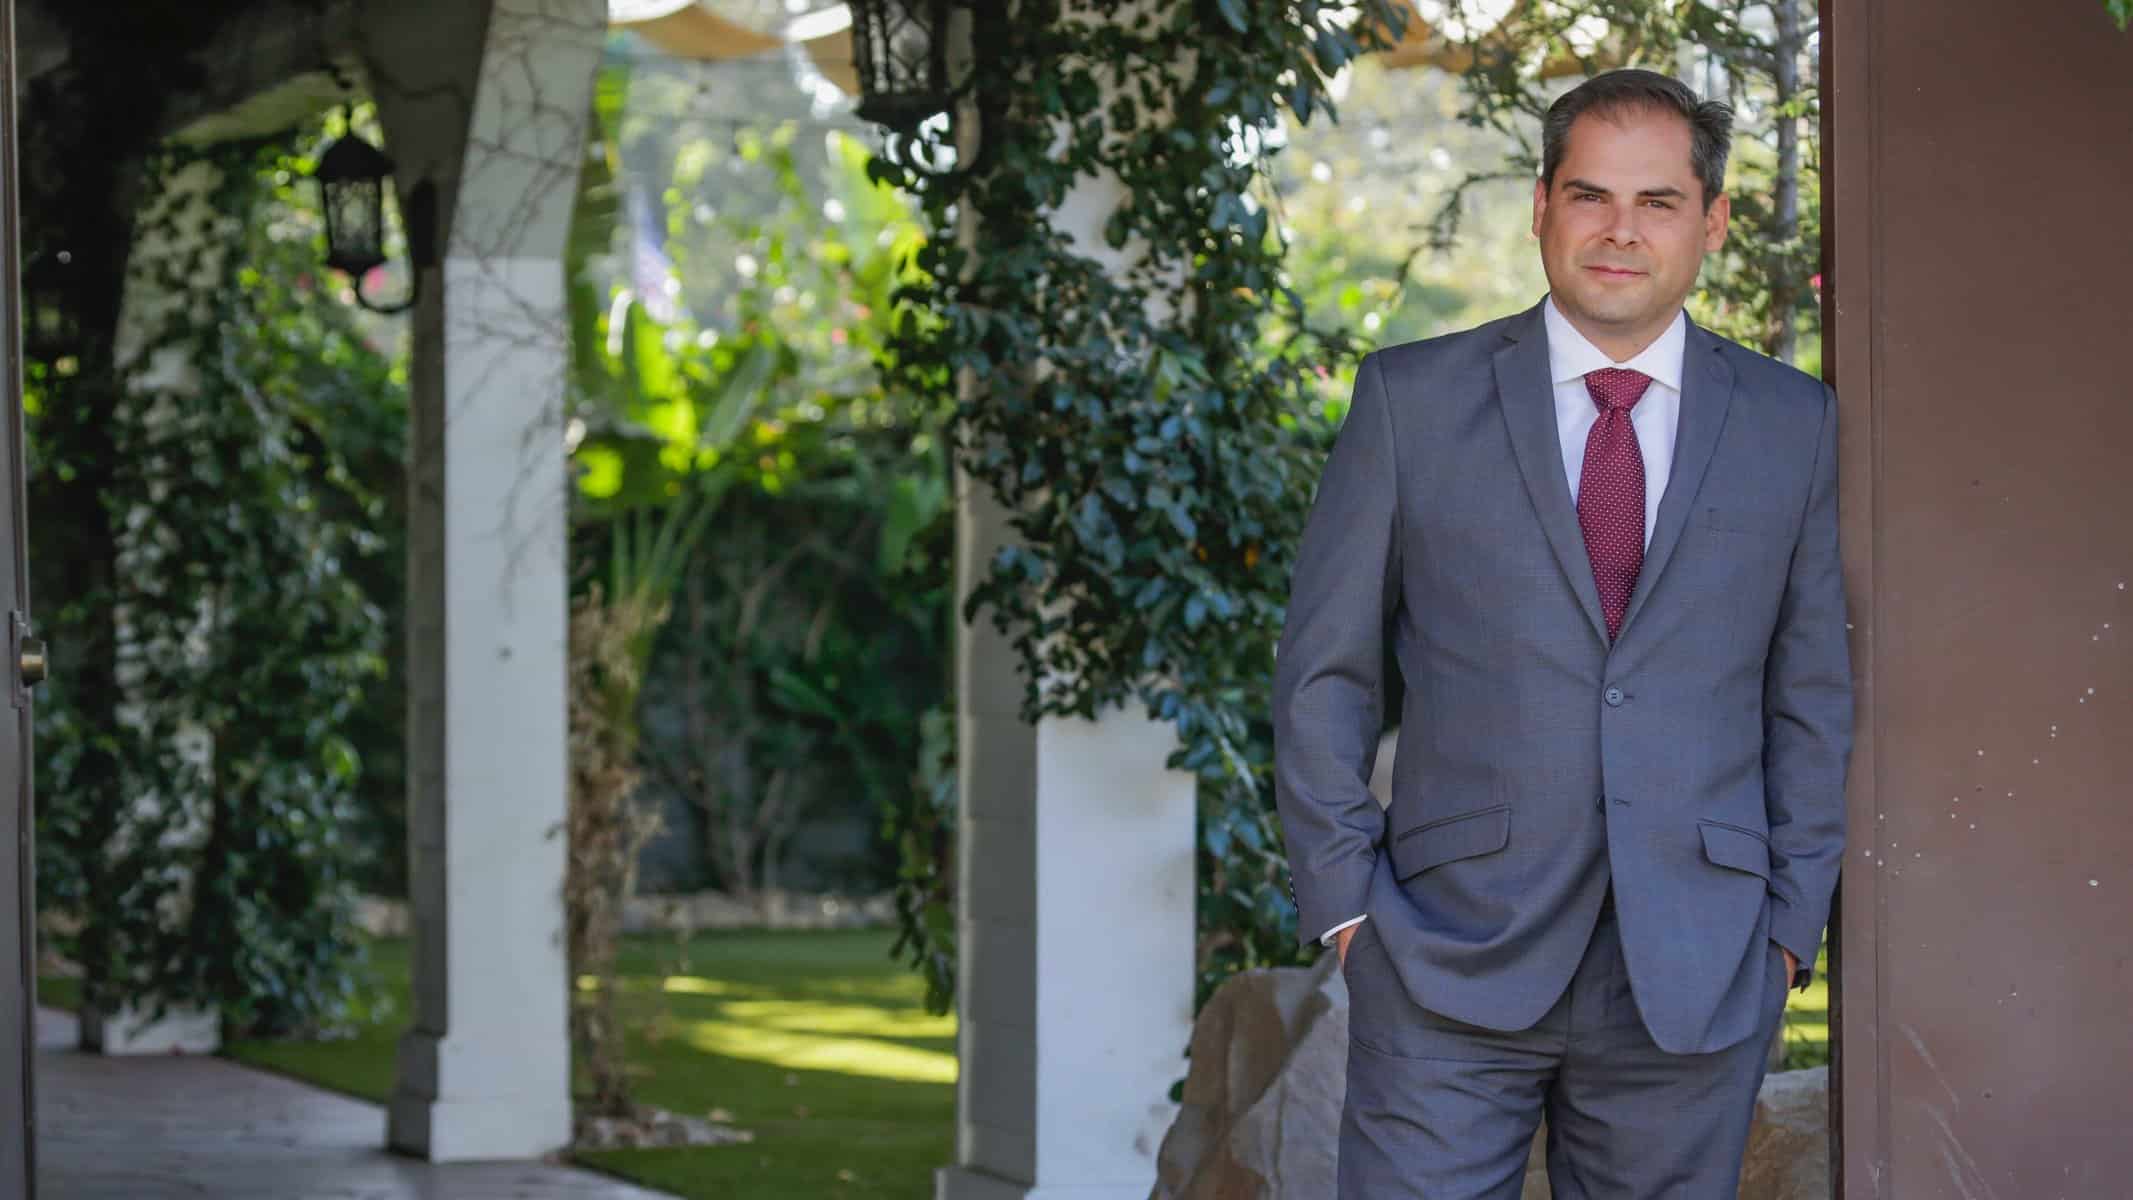 Mike Garcia wearing a grey suit smiling with a garden behind him.